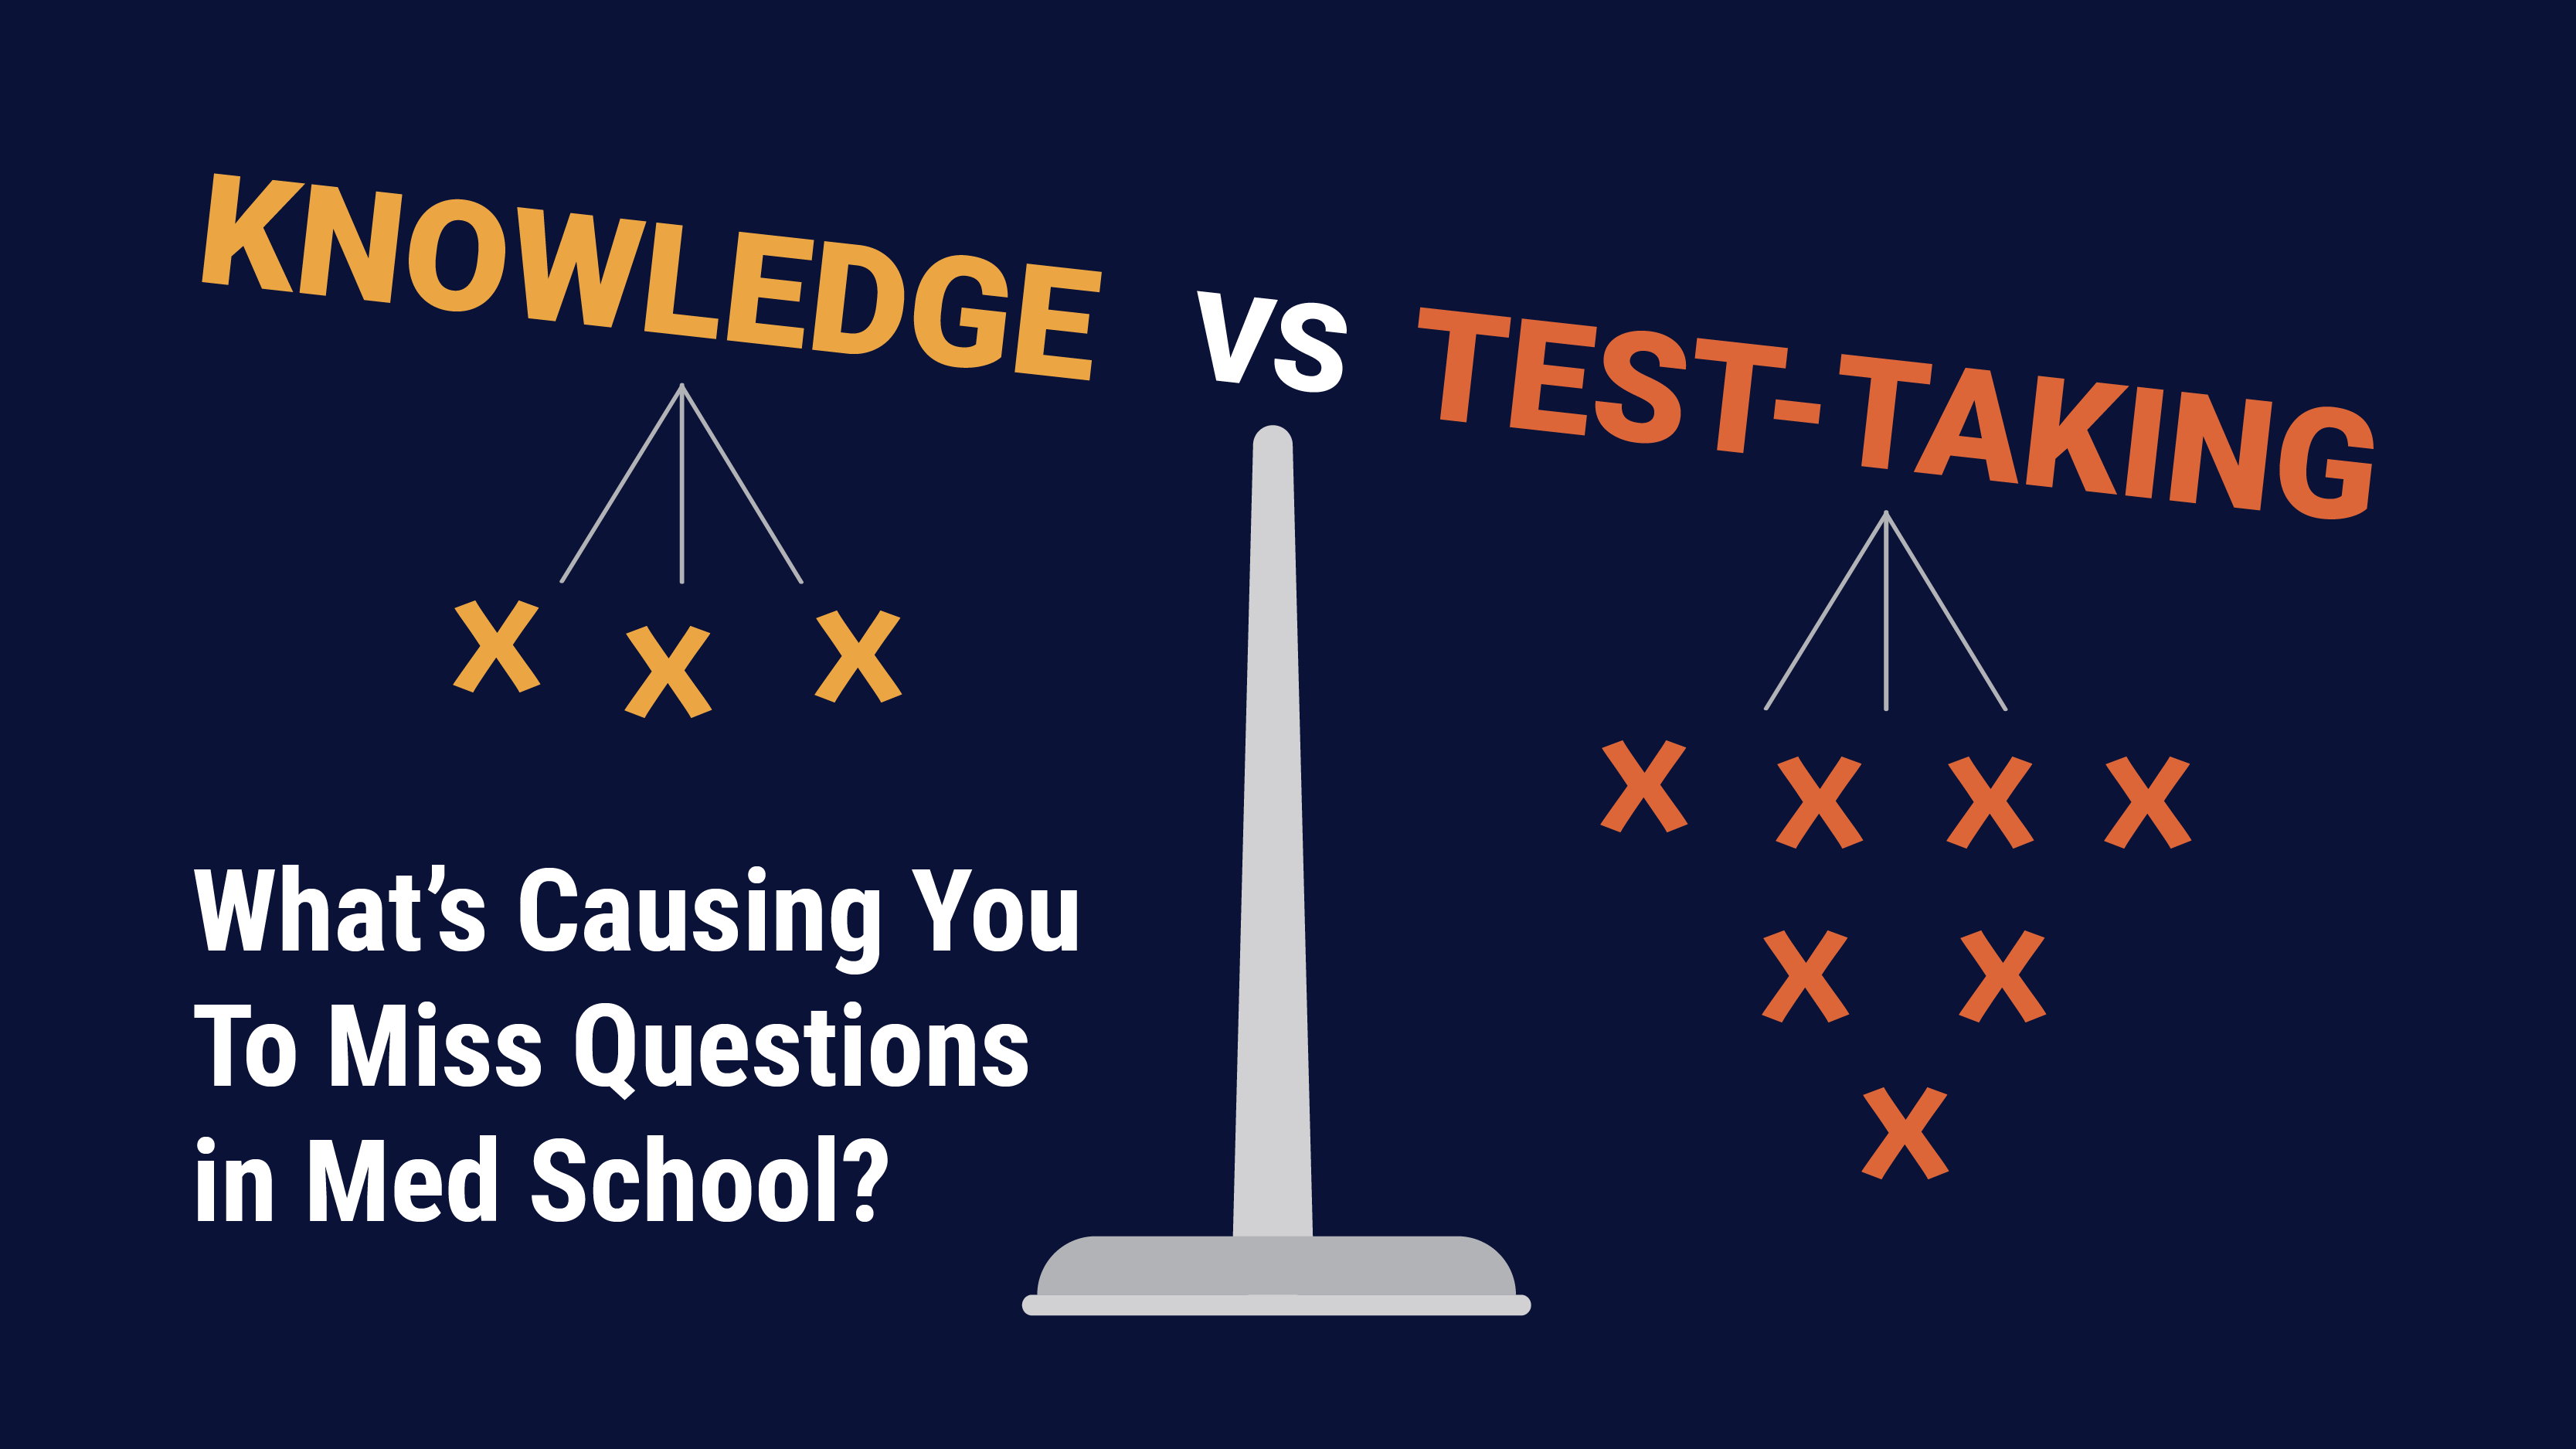 Featured image for “Knowledge Vs. Test-Taking – What’s Causing You To Miss Questions in Med School?”